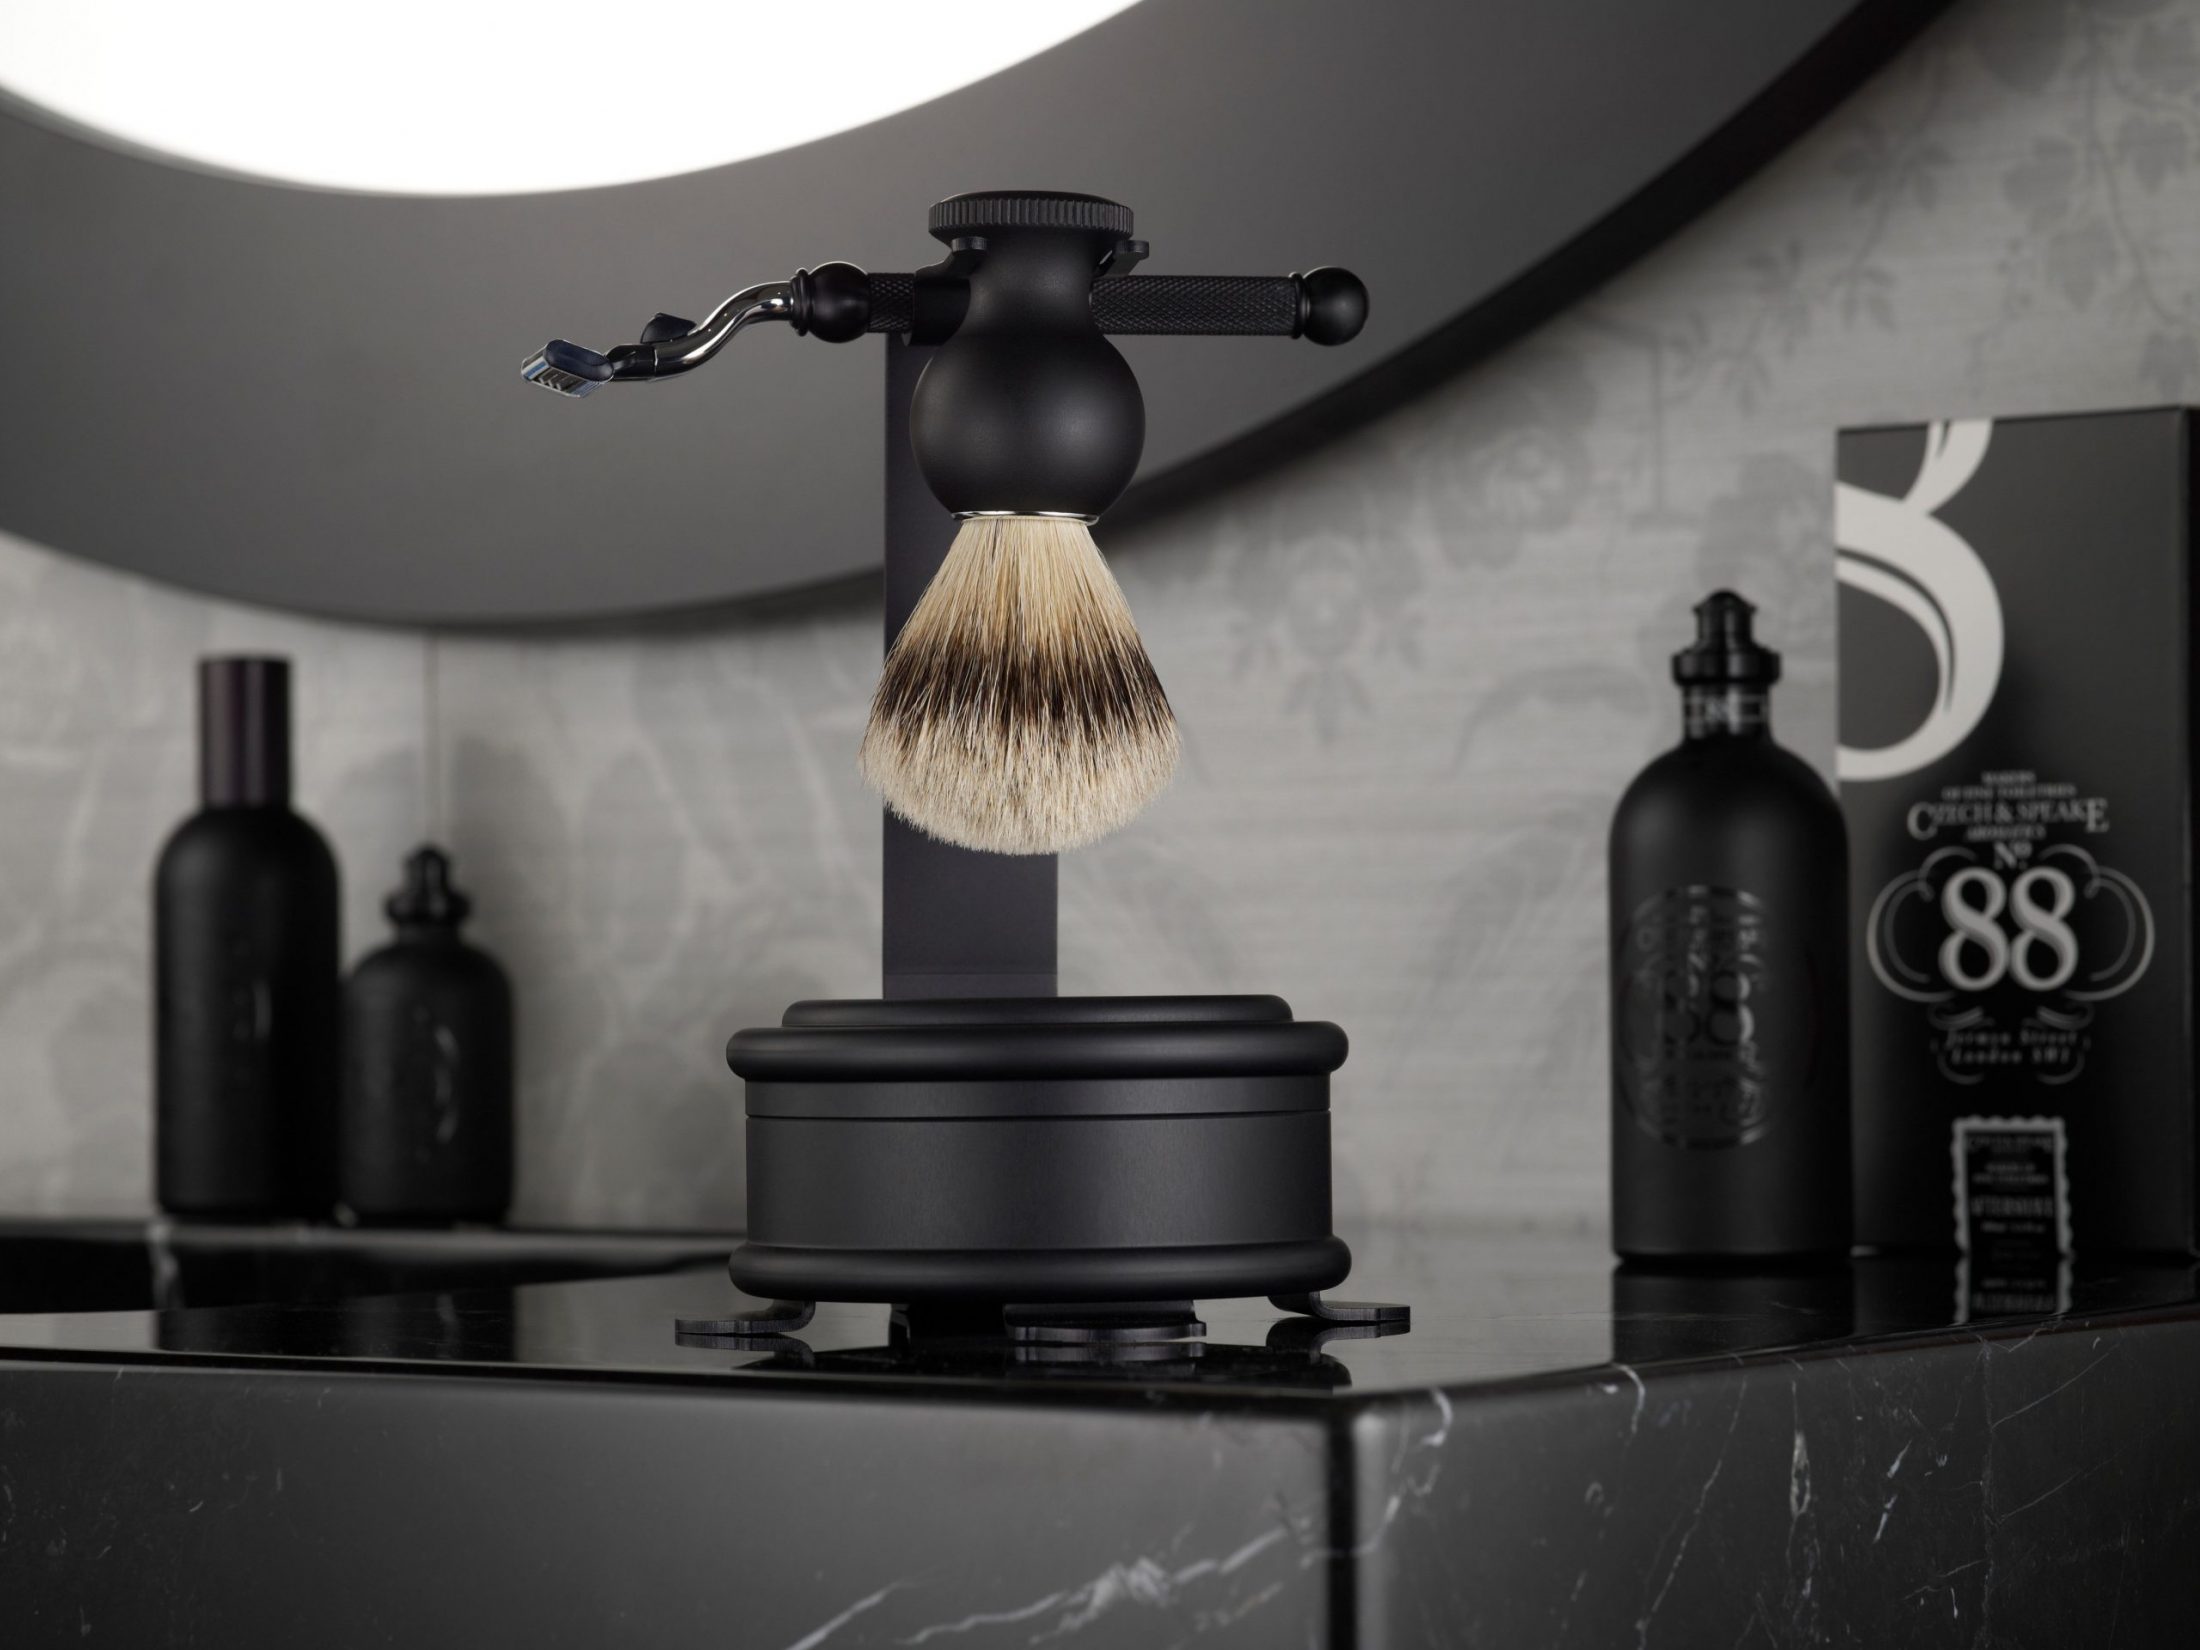 Czech & Speake No.88 Shaving Set & Stand on black marble vanity unit with fragrance behind.